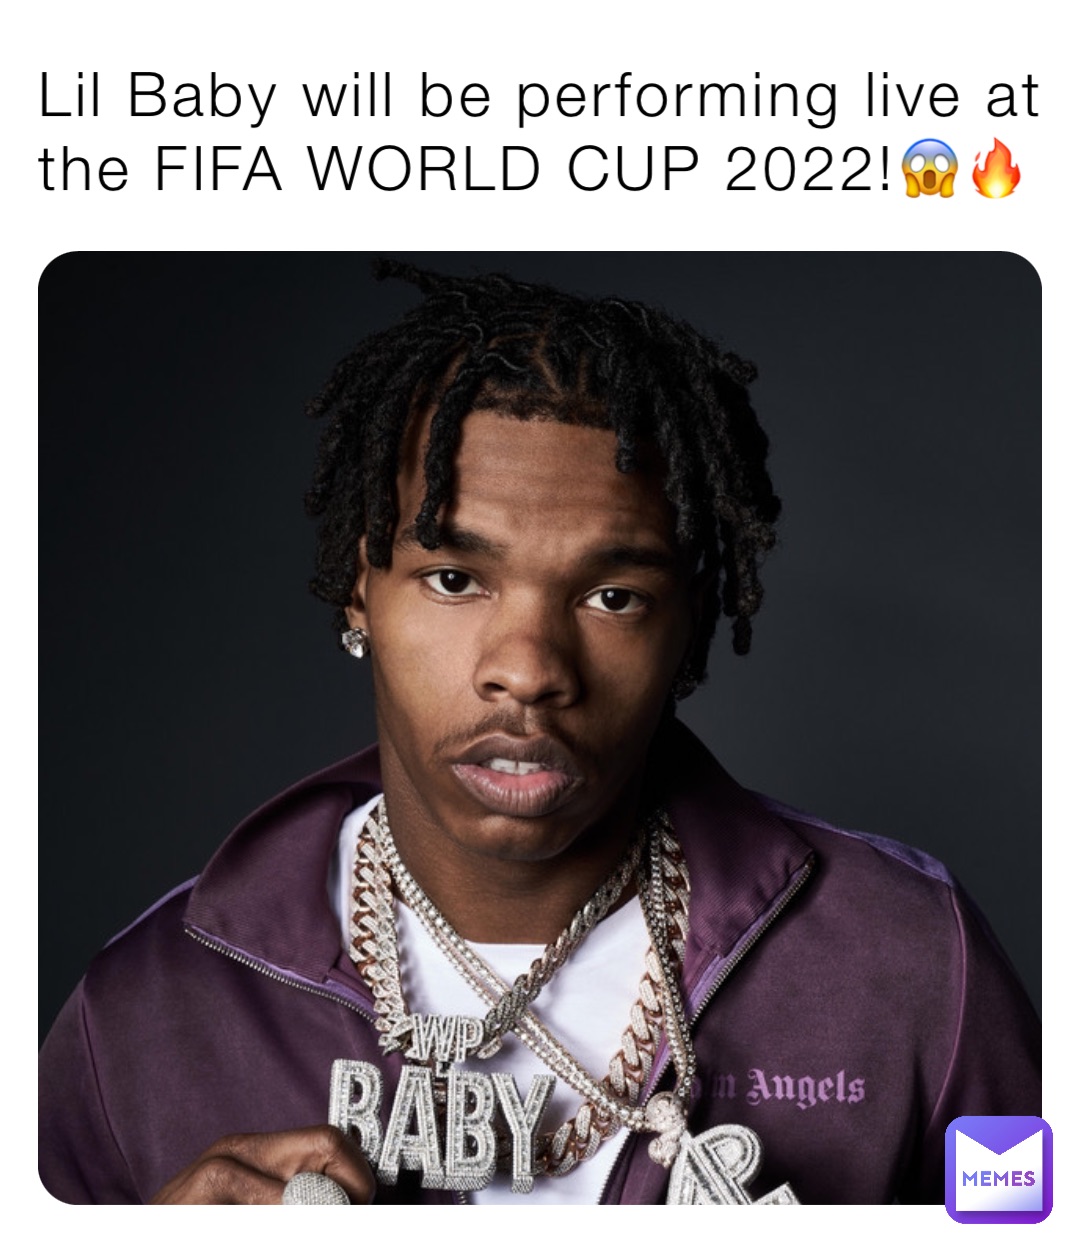 Lil Baby will be performing live at the FIFA WORLD CUP 2022!😱🔥